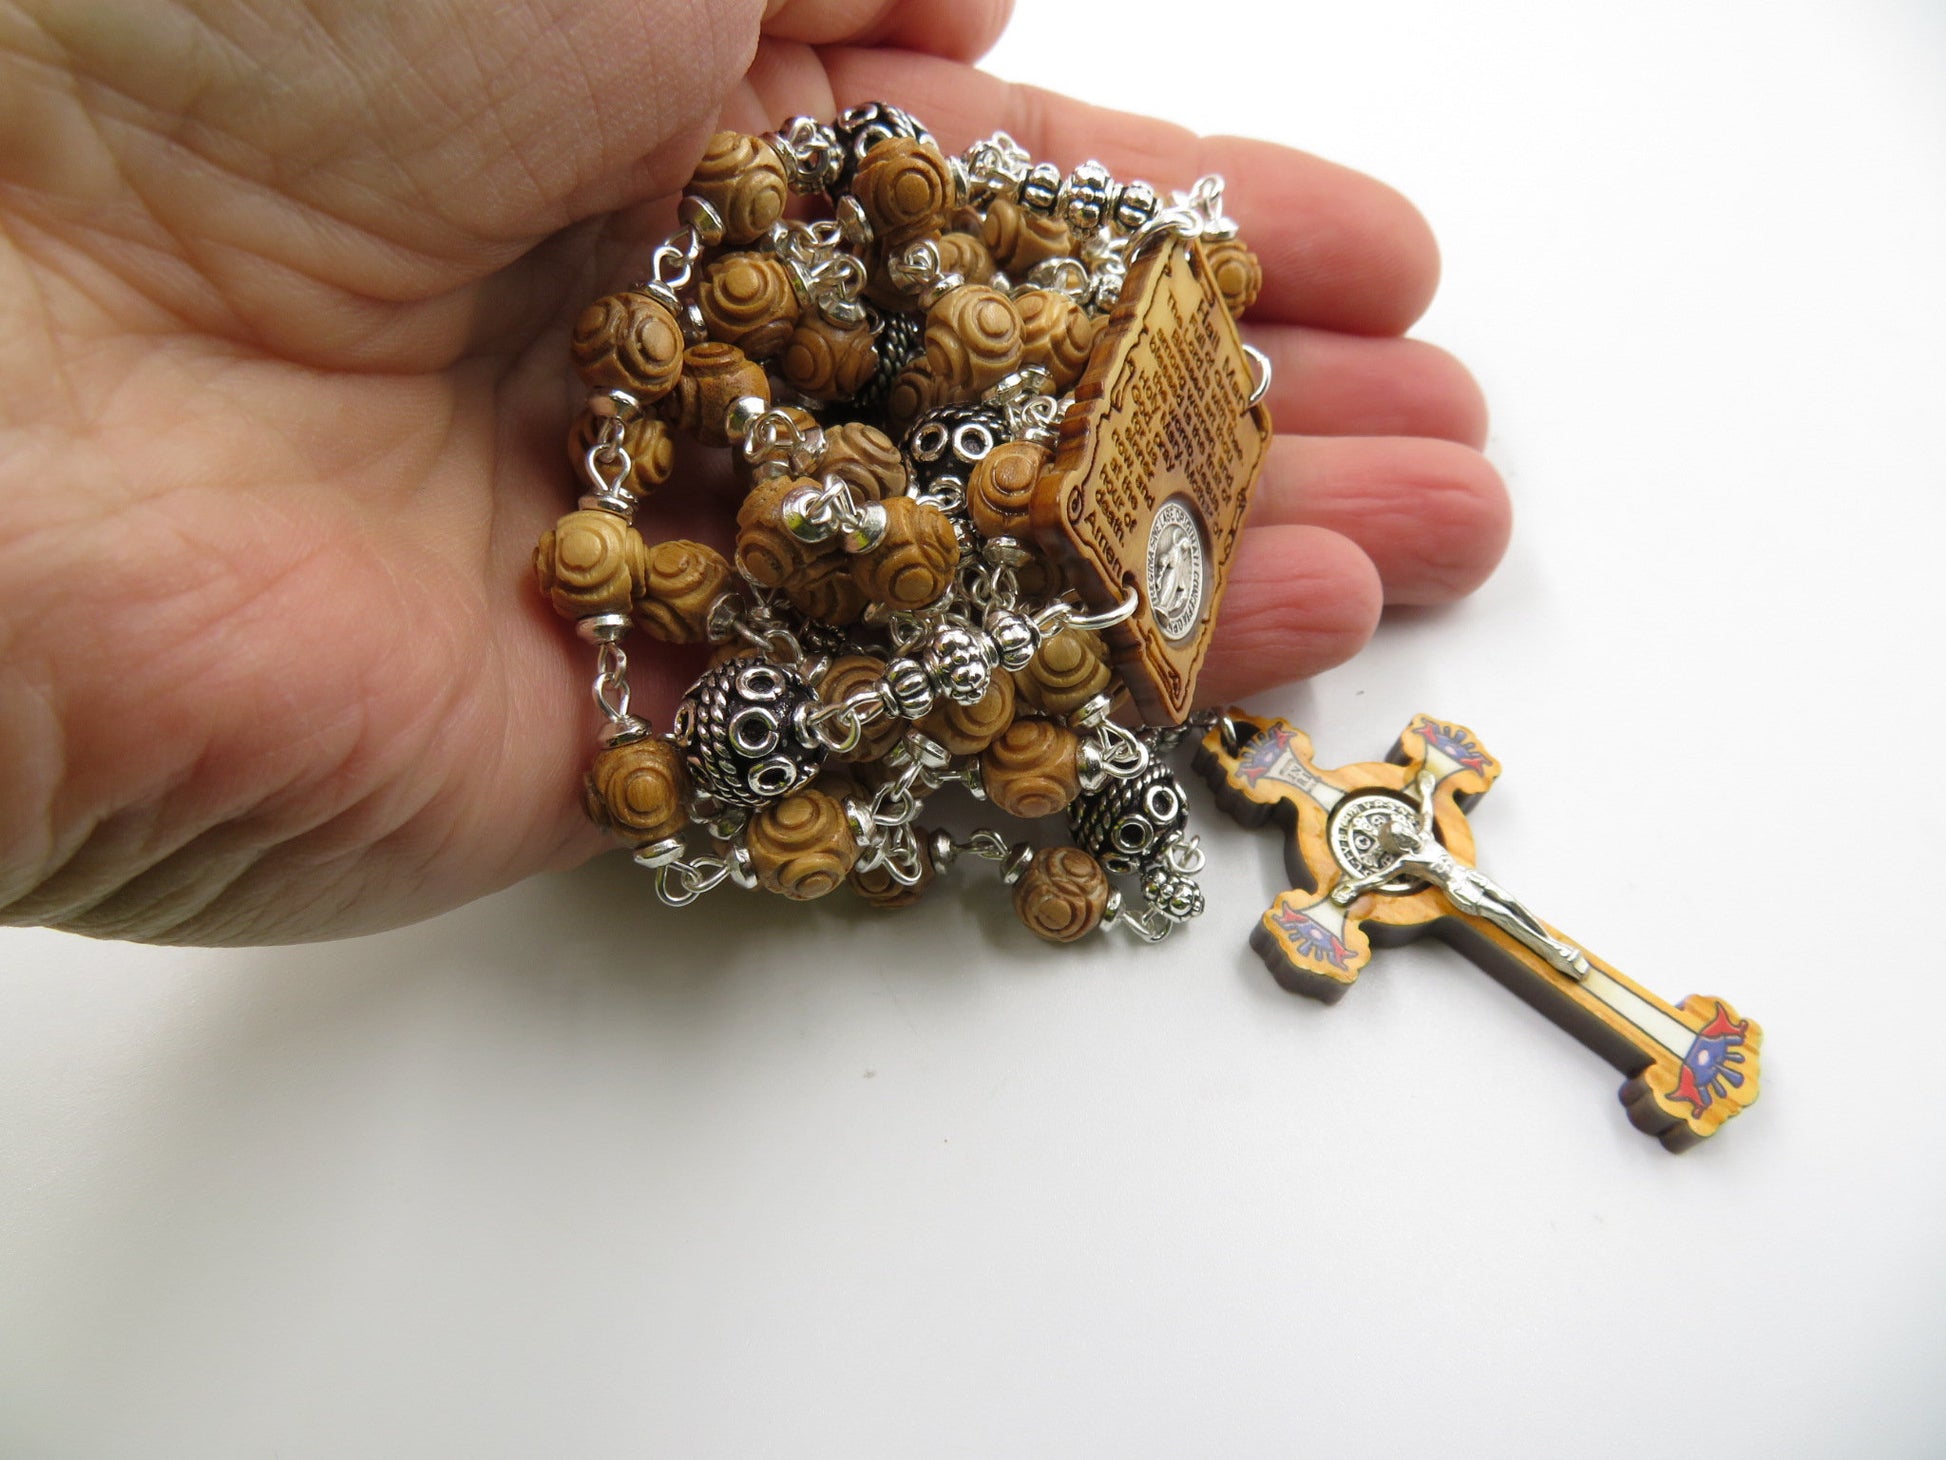 Miraculous Medal unique rosary beads with natural wood and silver beads, olive wood Saint Benedict crucifix and olive wood centre medal.